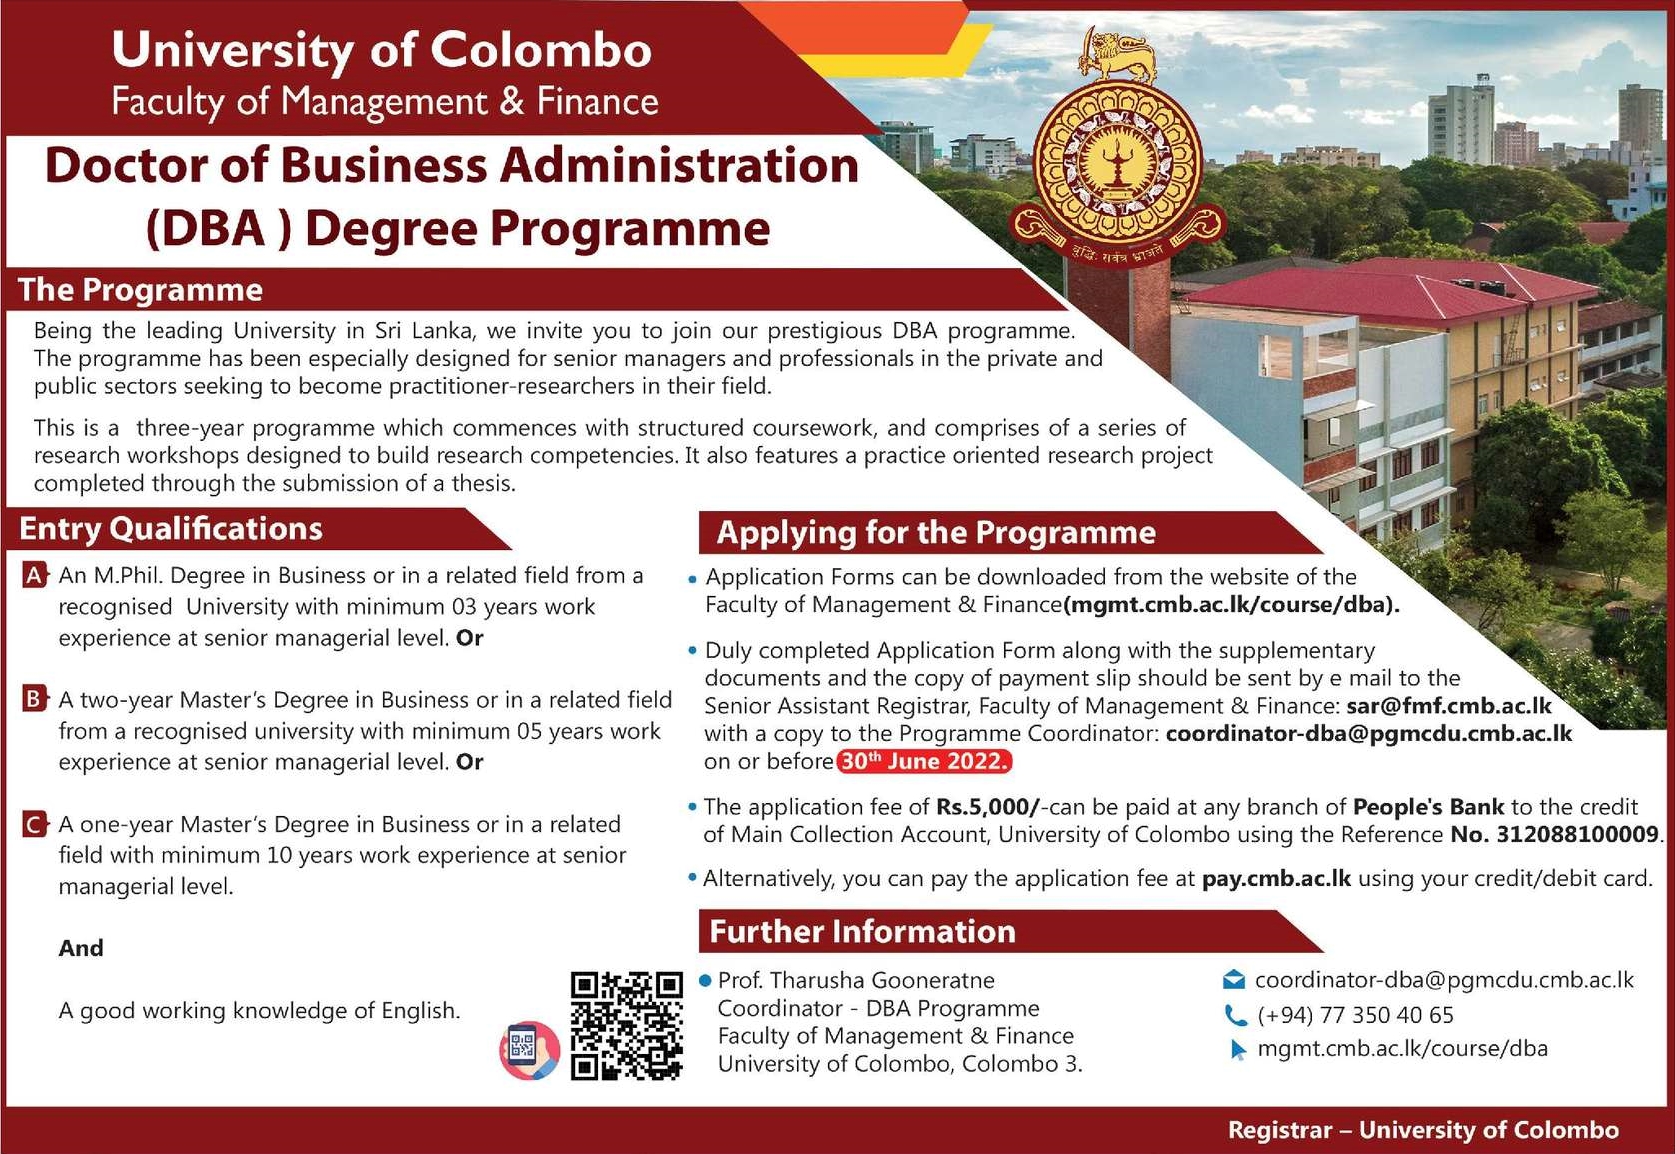 Doctor of Business Administration (DBA) Degree 2022 - University of Colombo